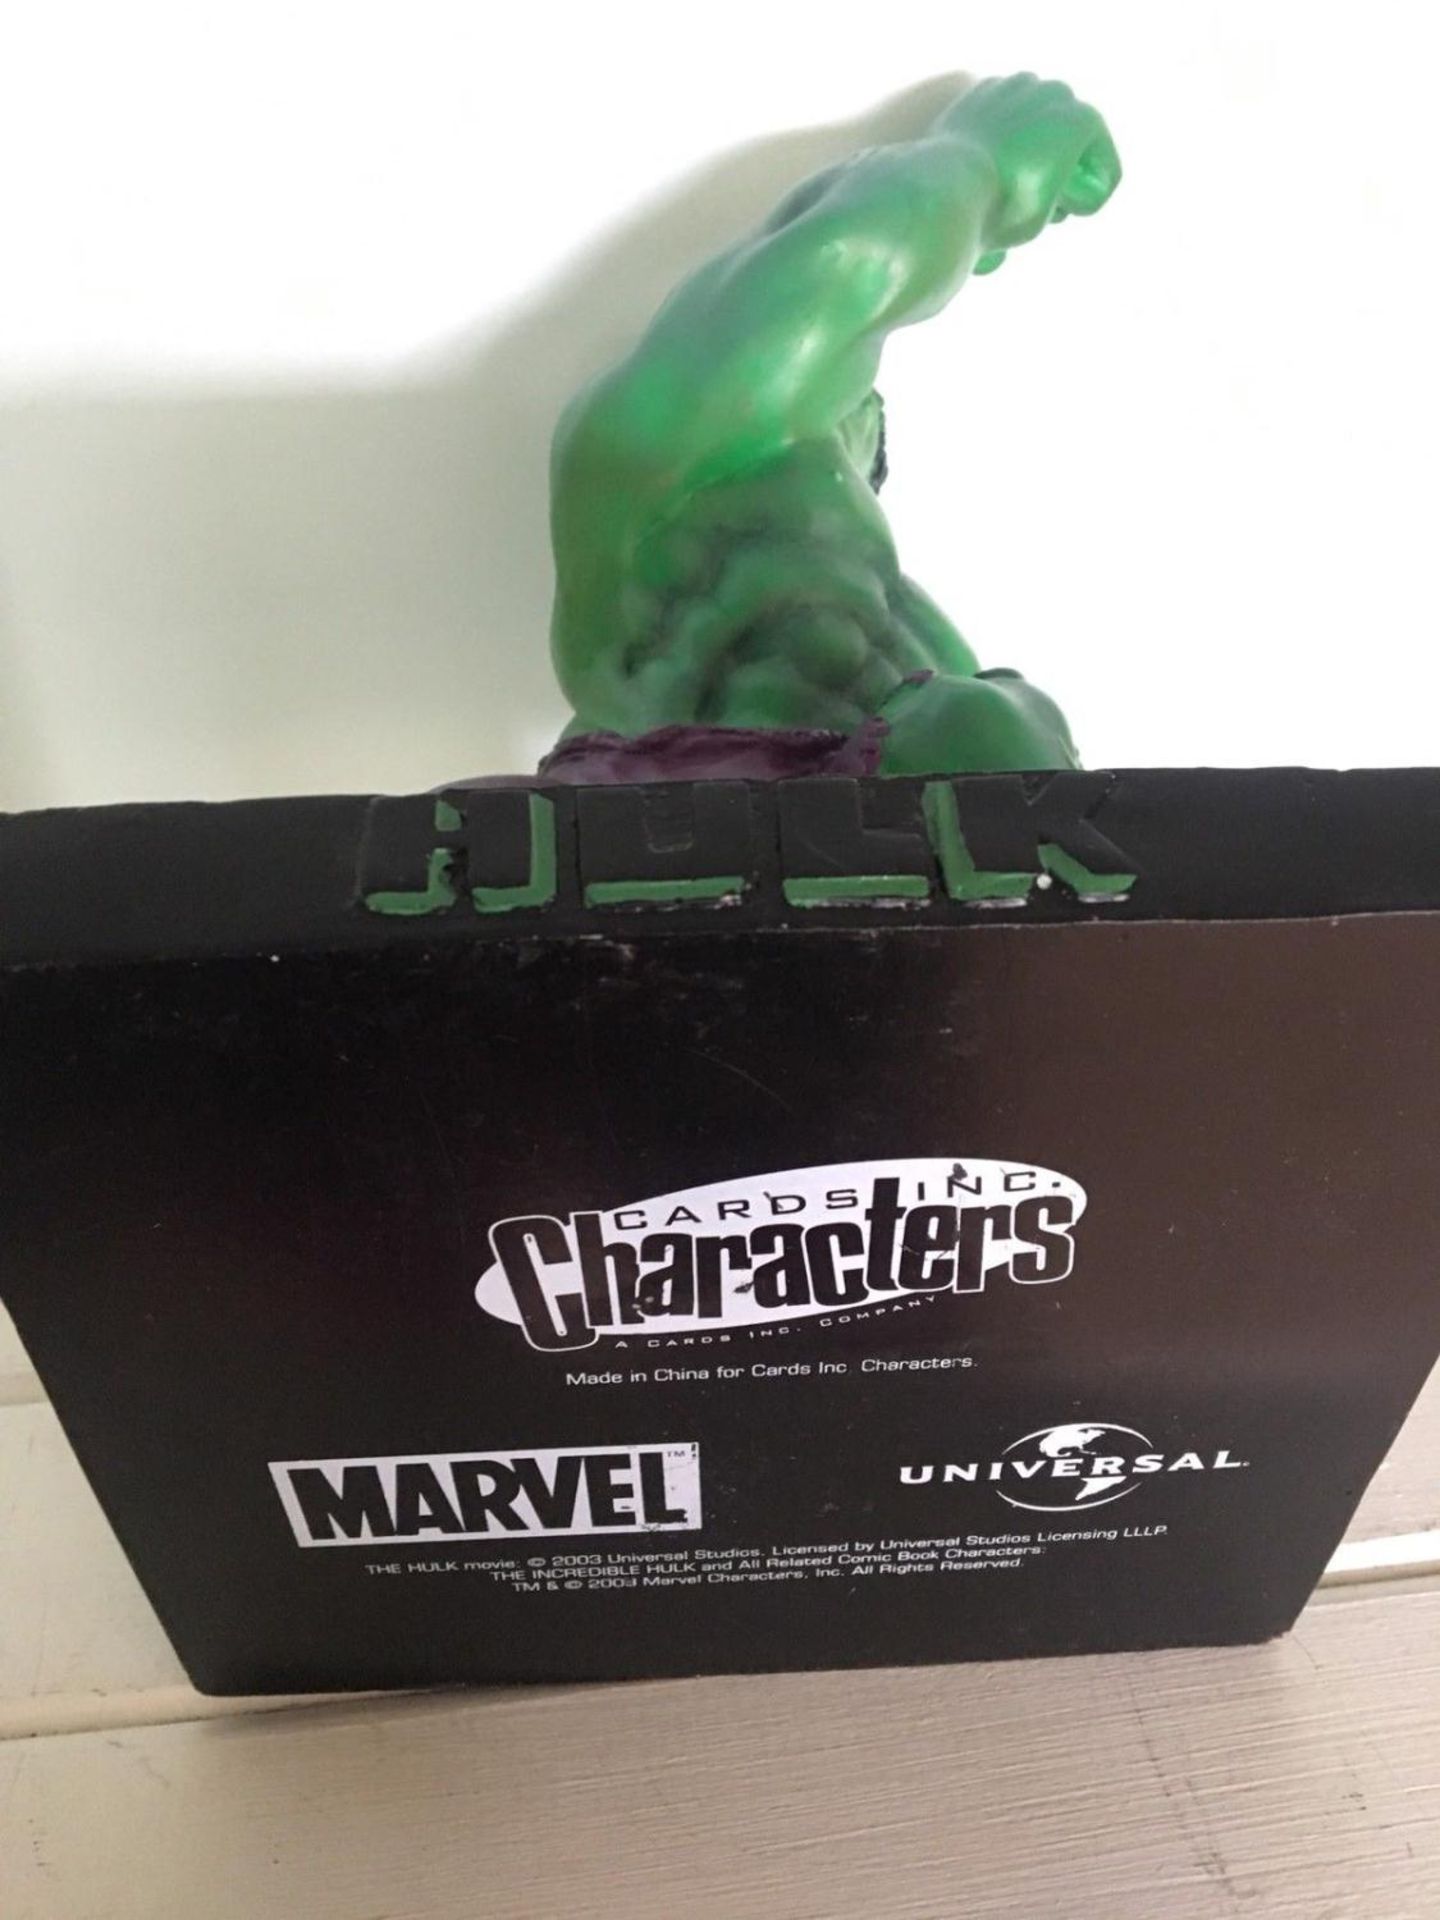 Limited Edition HULK Movie Box Set DVD with large rare statue Marvel 2003 - Image 3 of 3